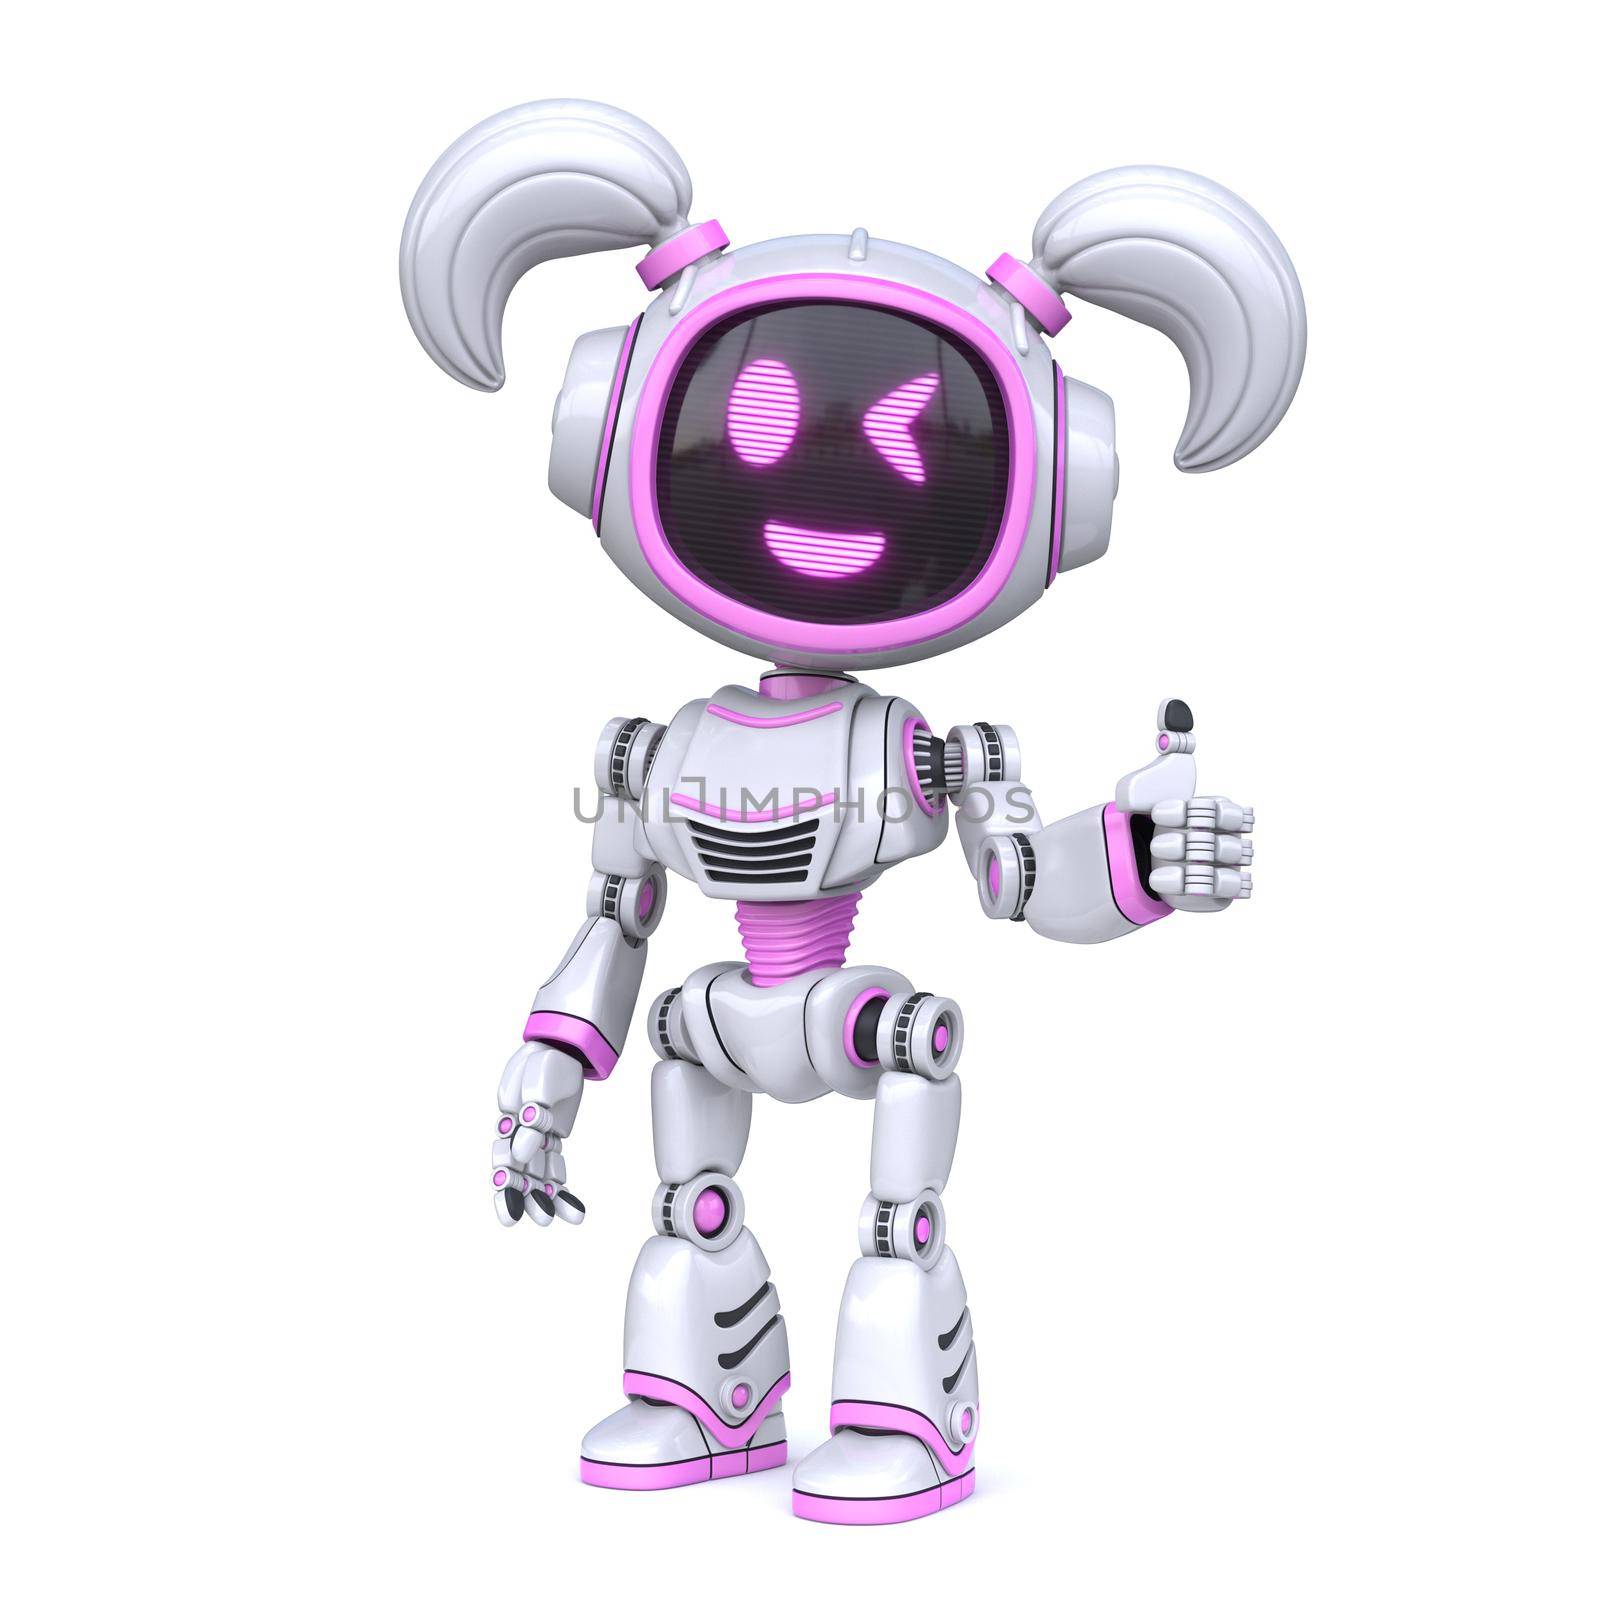 Cute pink girl robot giving thumbs up 3D rendering illustration isolated on white background